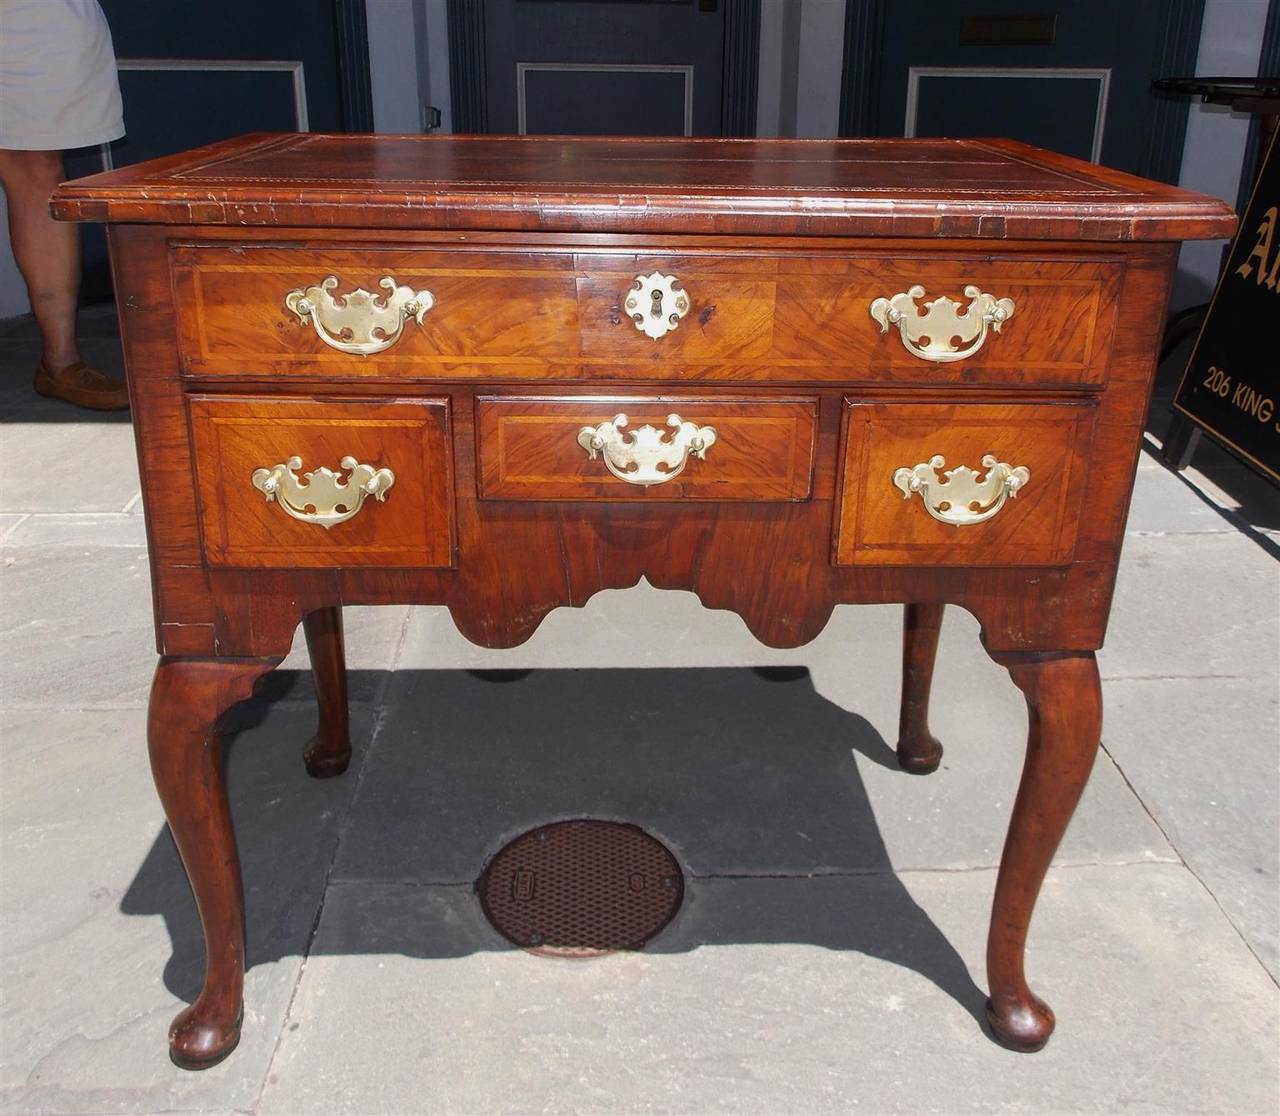 English Queen Anne burl walnut low boy with original leather top, inlaid feather banding, original brasses, carved skirt and terminating on carved knees with pad feet, Mid-18th Century.